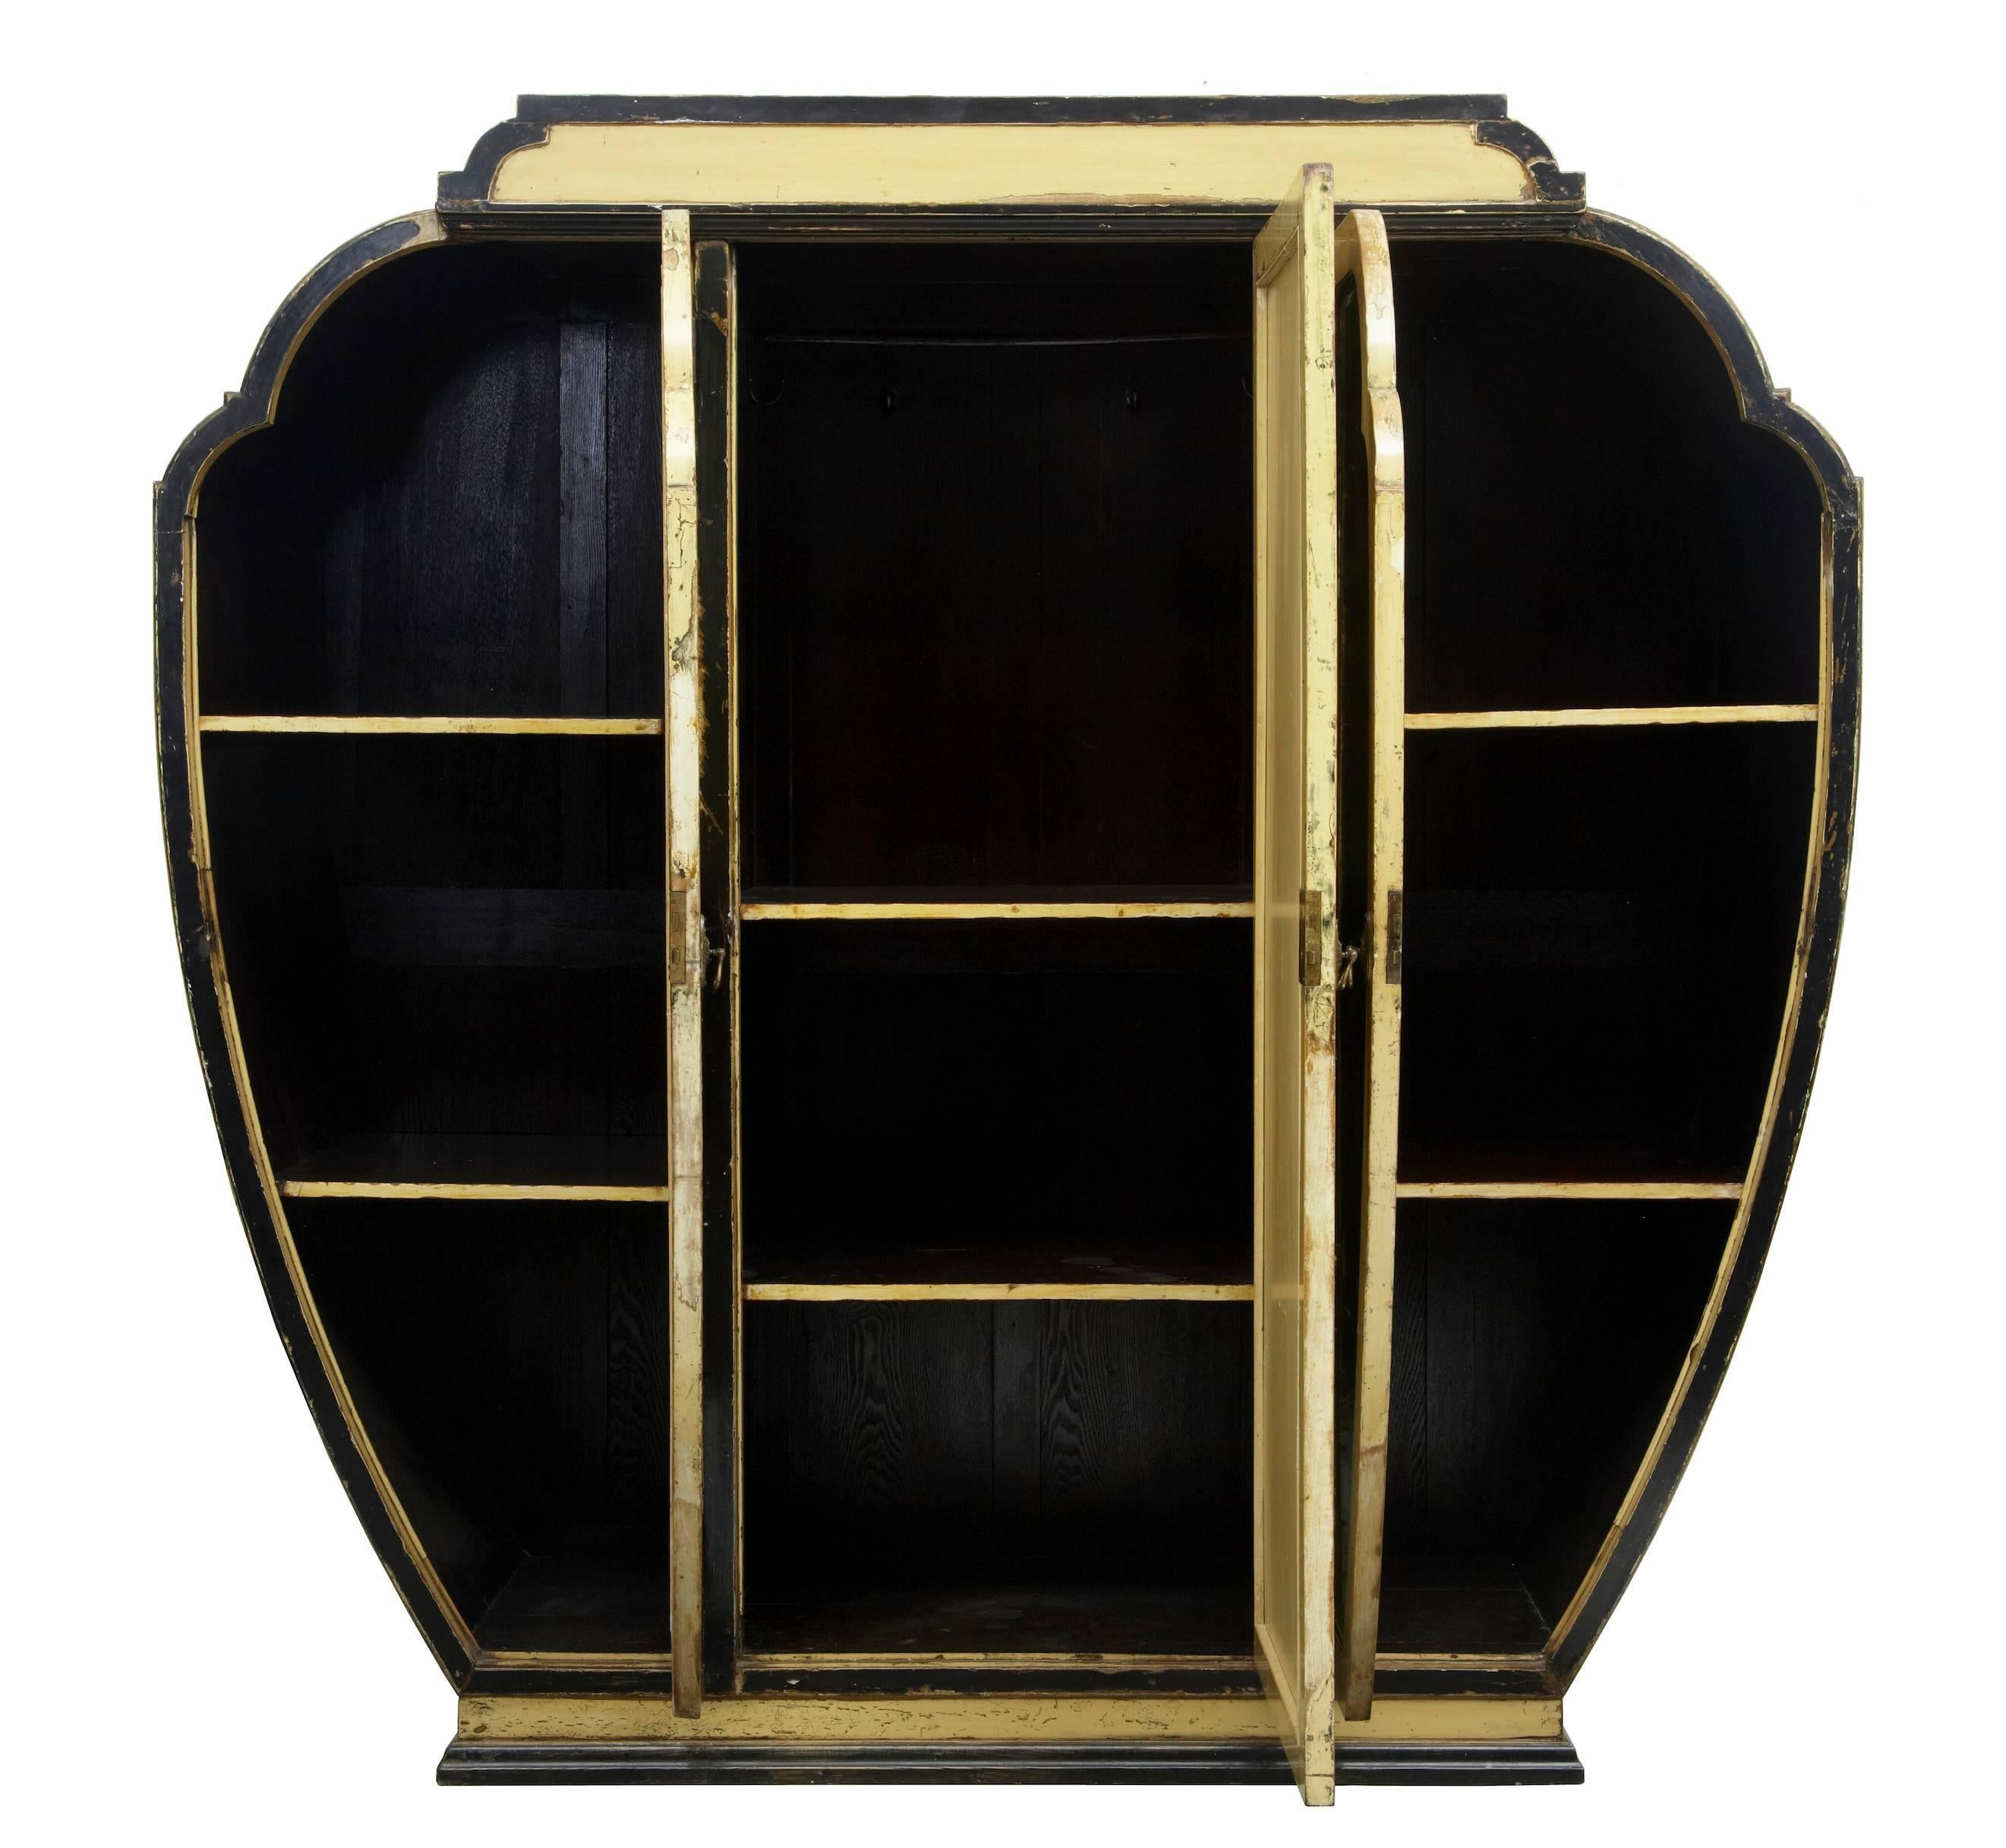 Rare wardrobe from the Art Deco movement in Shanghai, circa 1920.
Strong Art Deco shape, with its original lacquered paint work. Paintwork has been rubbed back in places but we think this gives it individual charm.
Three mirrored doors which open